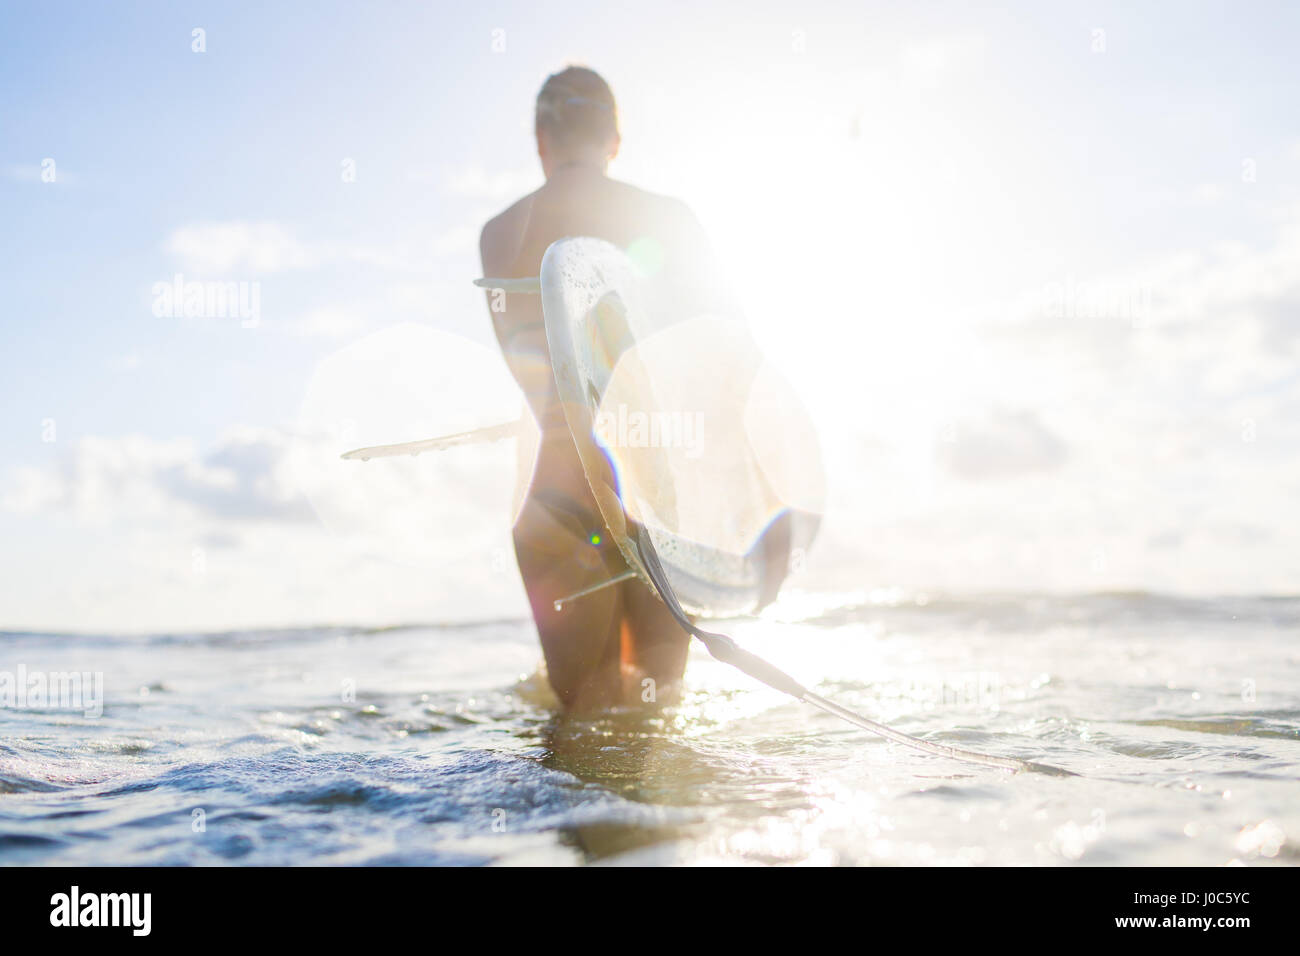 Rear view of woman carrying surfboard in sunlit sea, Nosara, Guanacaste Province, Costa Rica Stock Photo